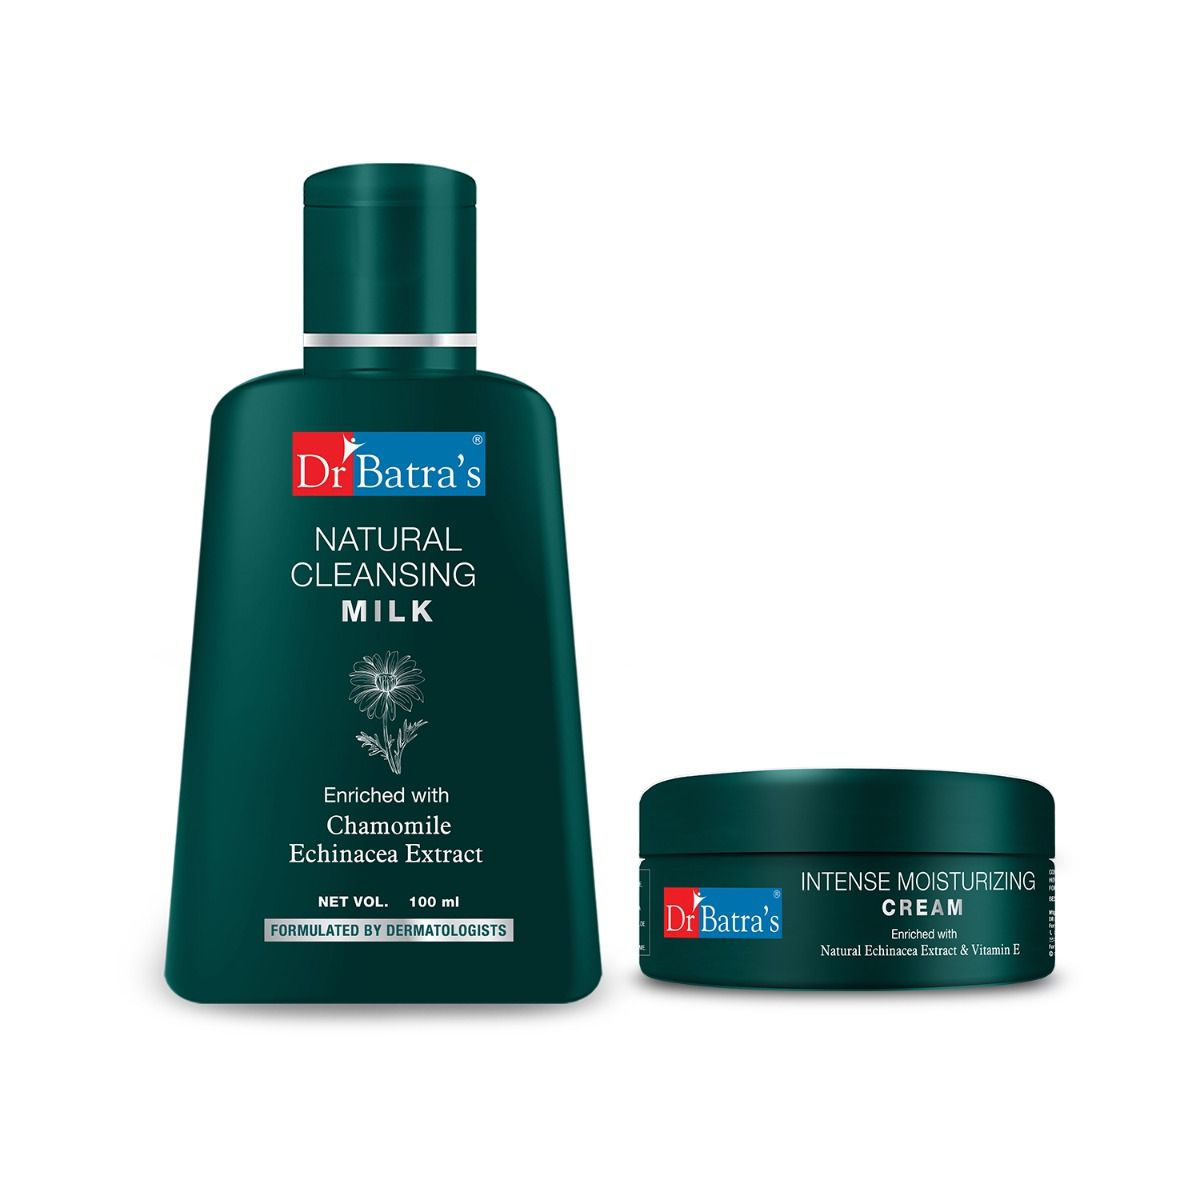     			Dr Batra's Natural Cleansing Milk And Intense Moisturizing Cream (Pack Of 2 Men And Women)